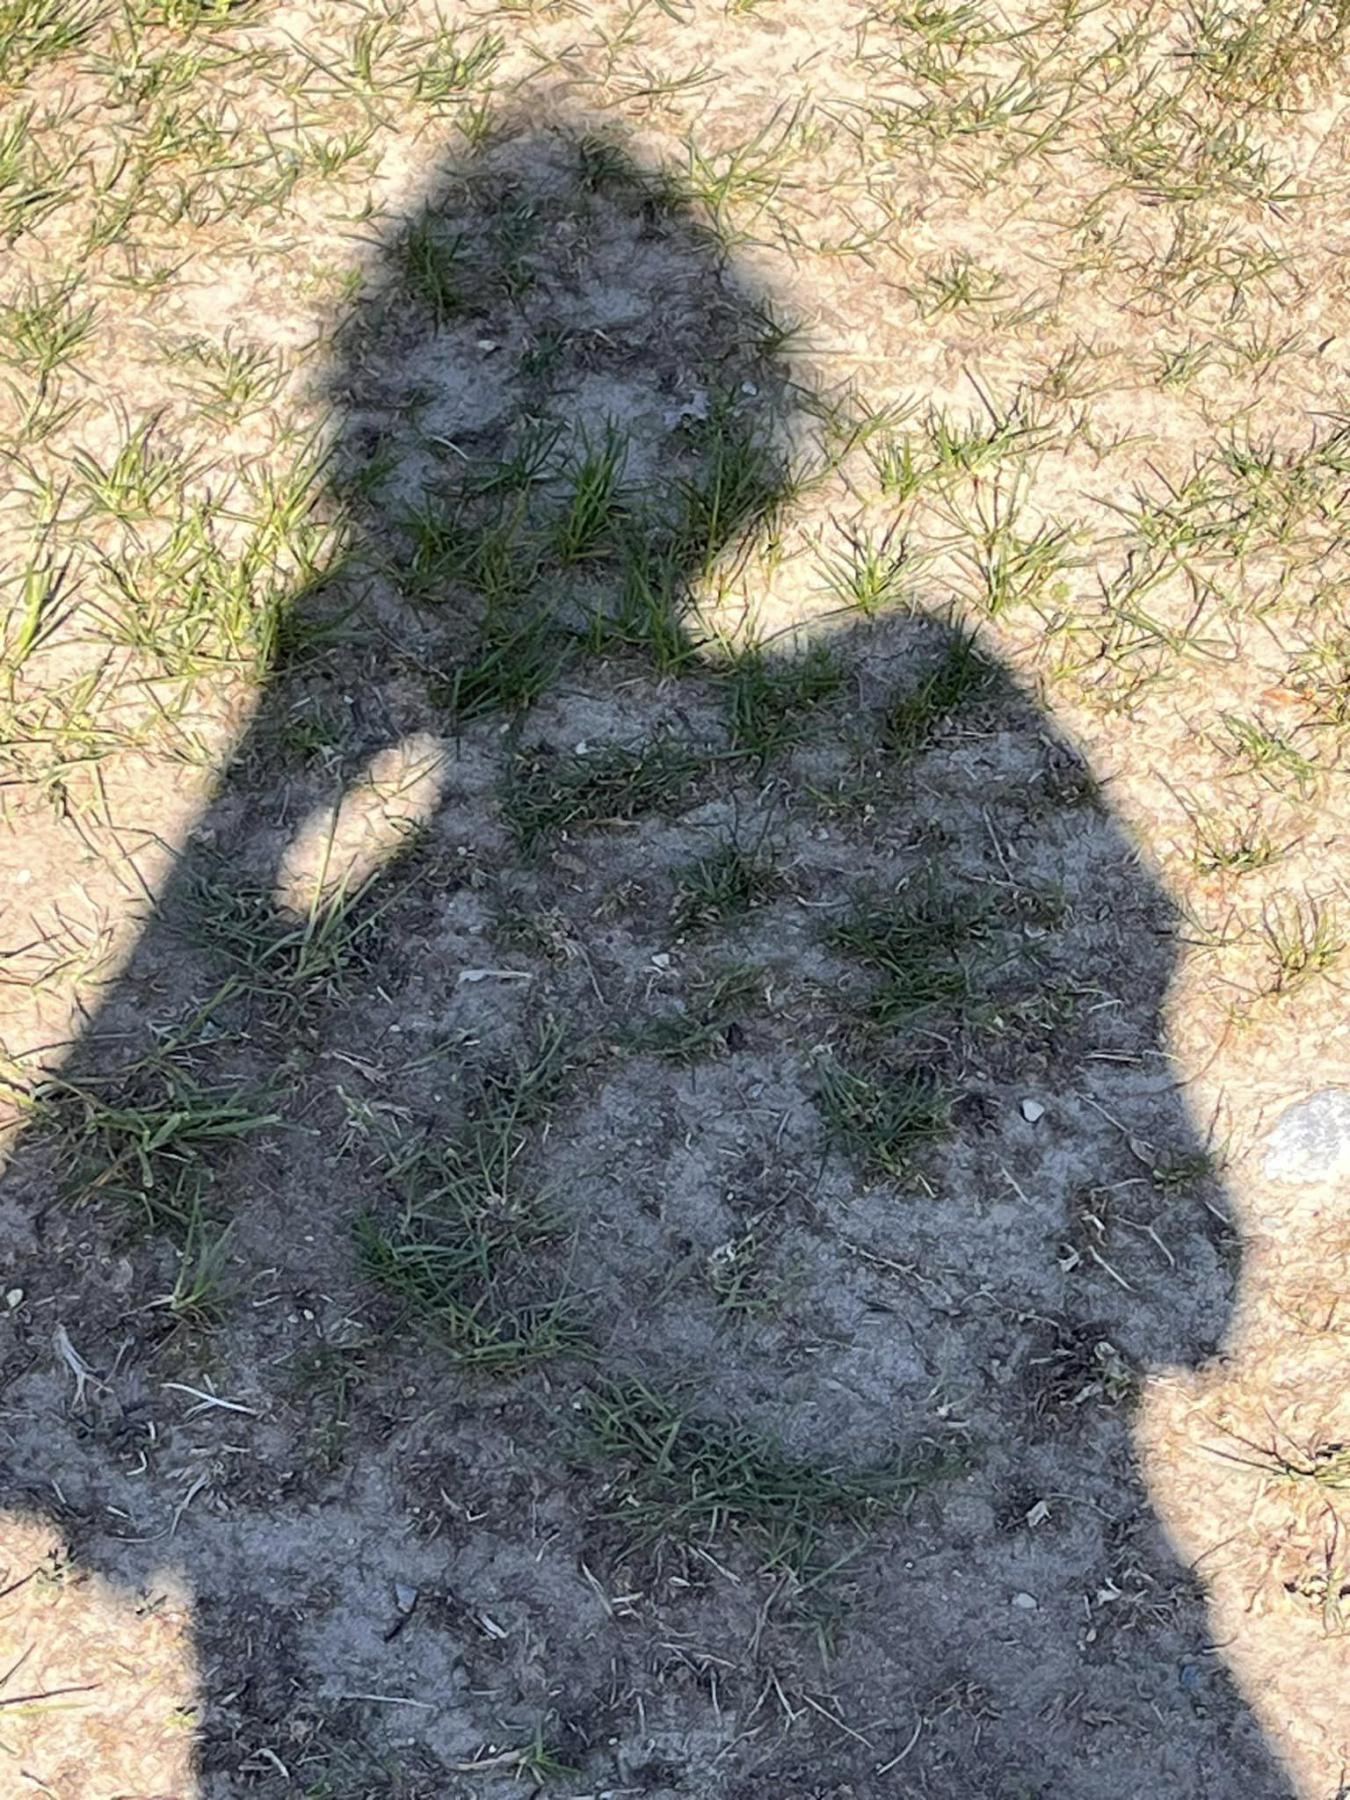 shadow of a person on the bare grass